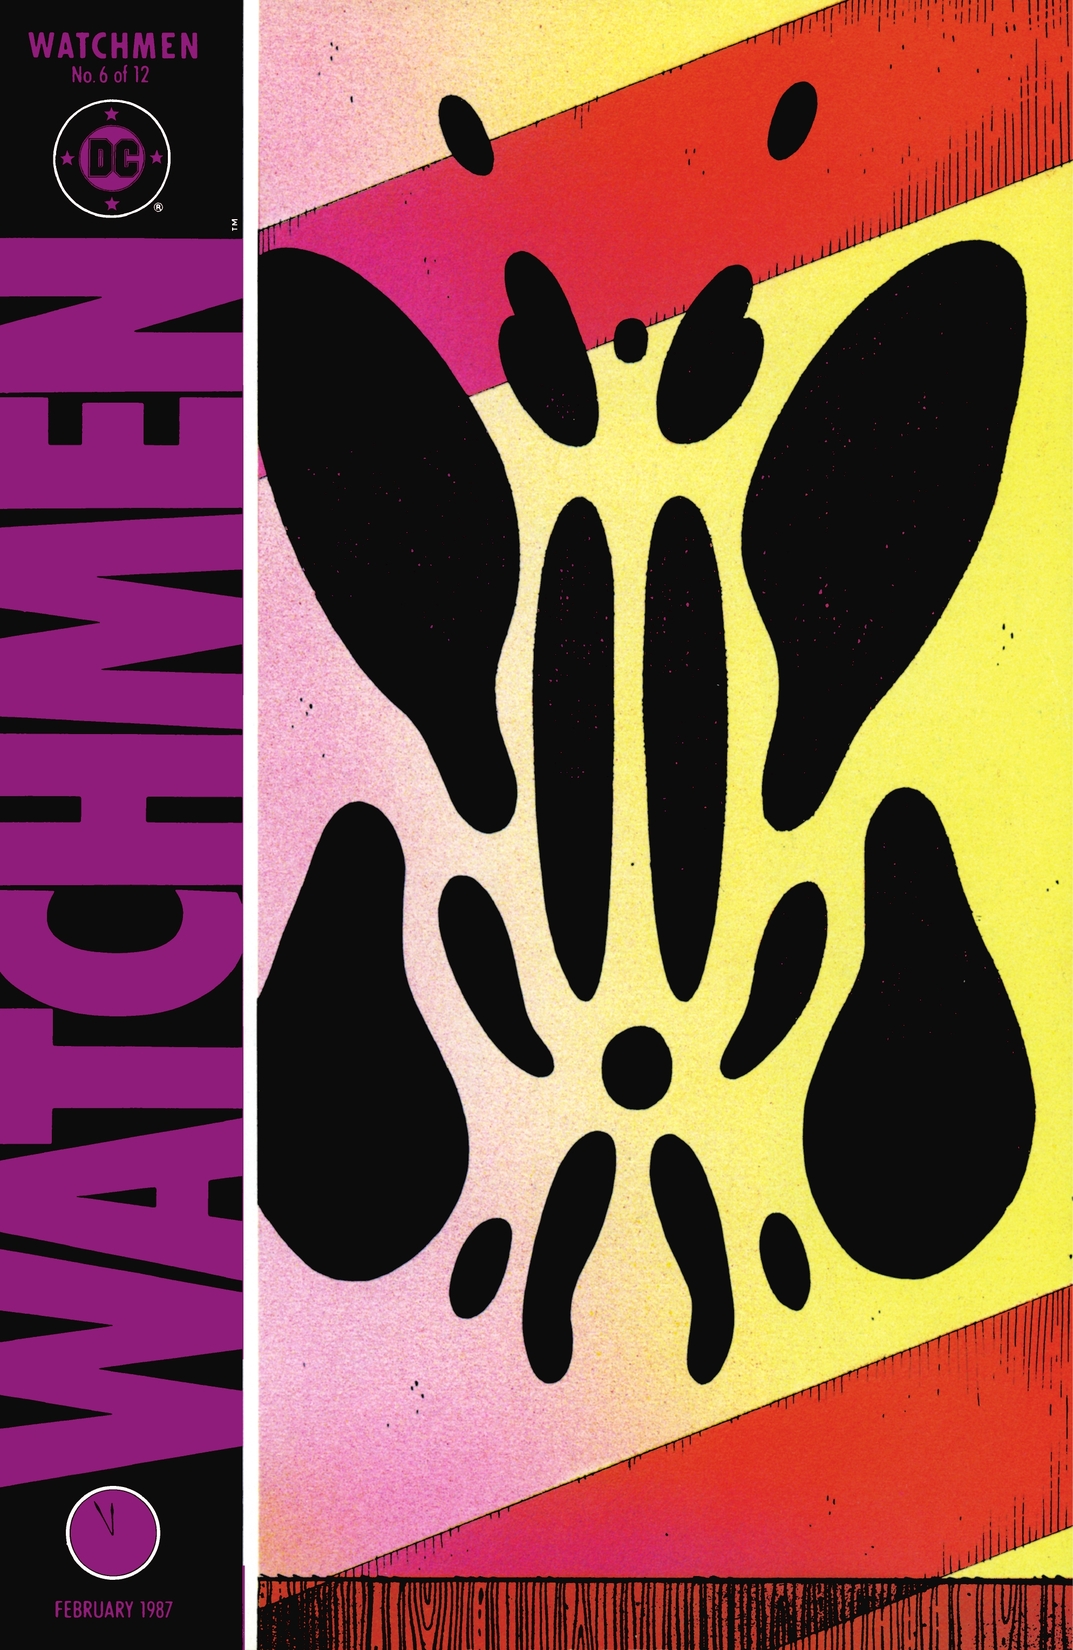 Watchmen #6 preview images